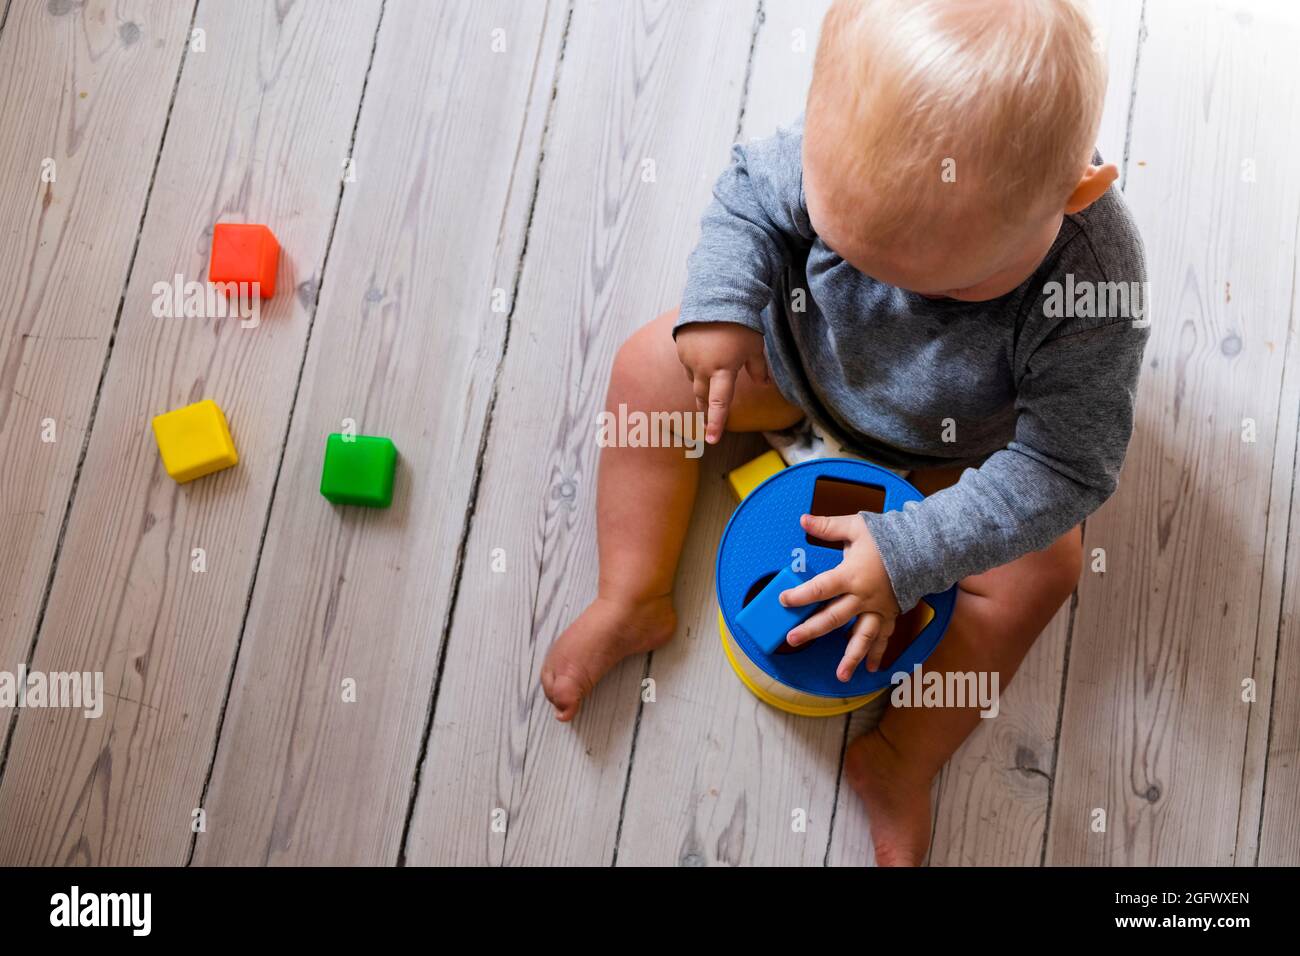 Baby boy playing in room Stock Photo